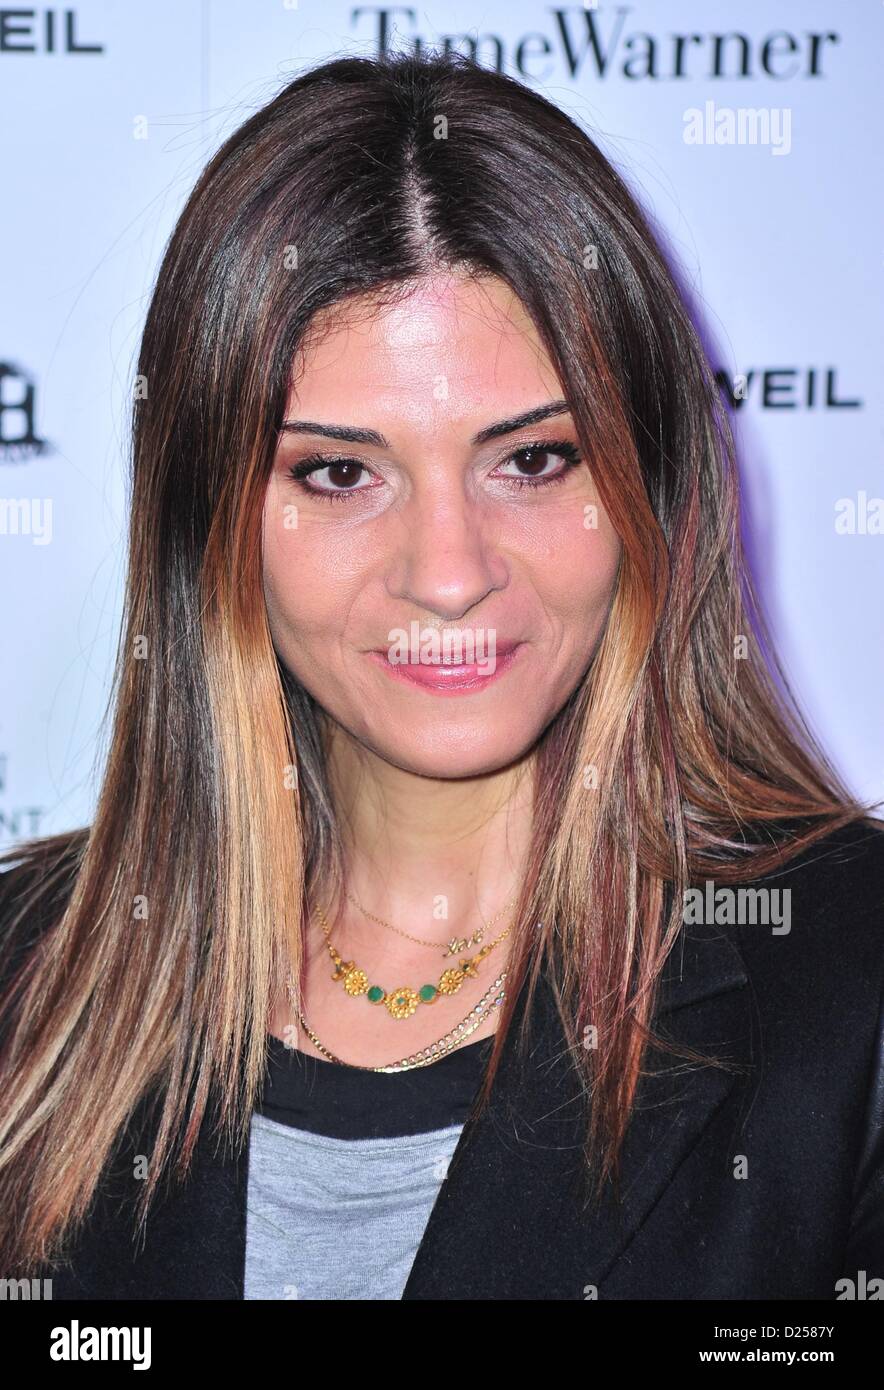 New York, USA. 14th January 2013. Callie Thorne at arrivals for Celebrity Charades Annual Benefit Gala, Capitale, New York, NY January 14, 2013. Photo By: Gregorio T. Binuya/Everett Collection Stock Photo